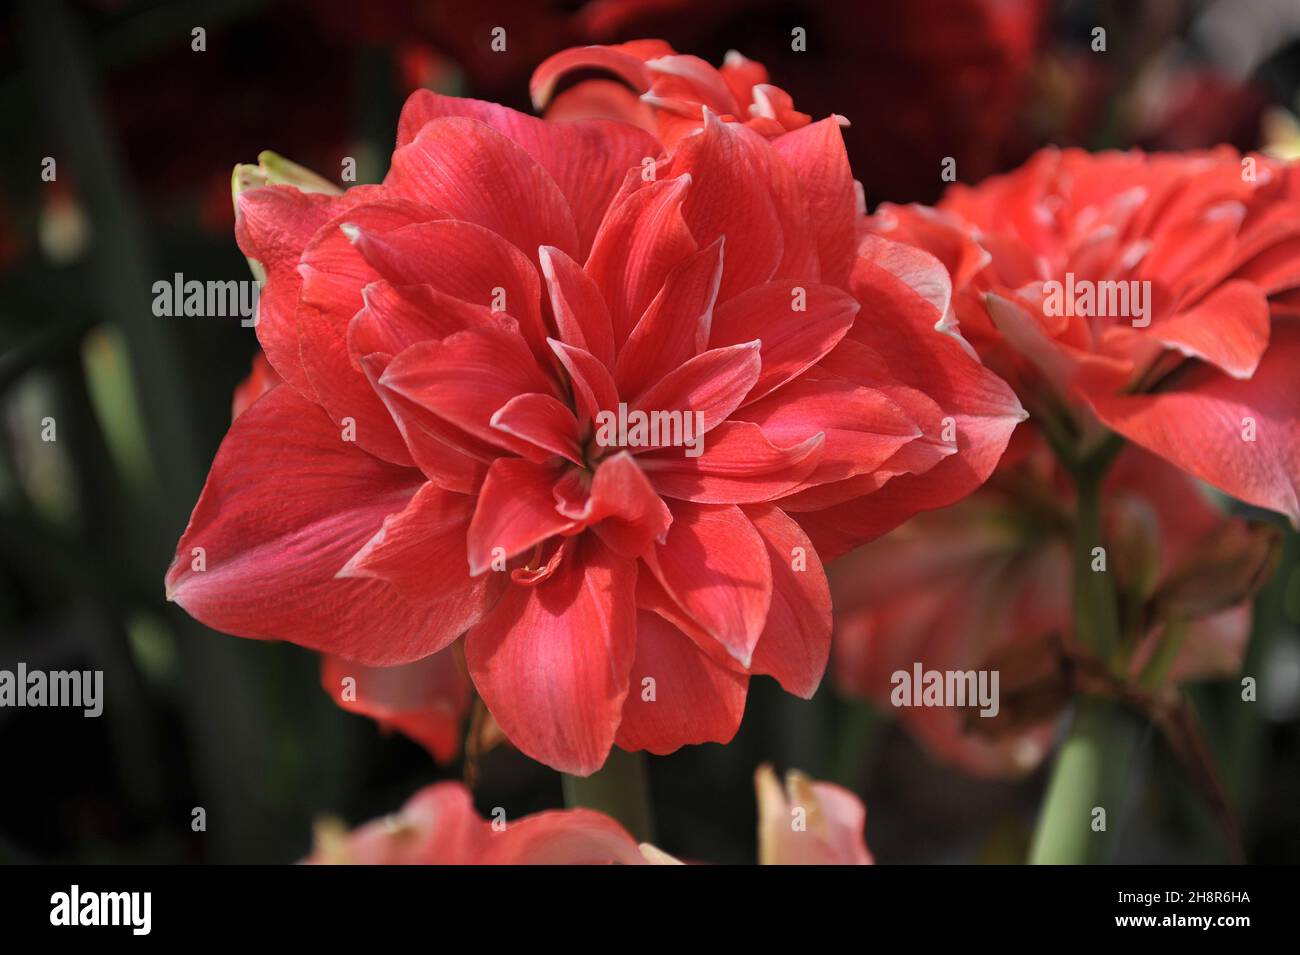 Red double-flowered hippeastrum (Amaryllis) Double Dream blooms in a garden in April Stock Photo